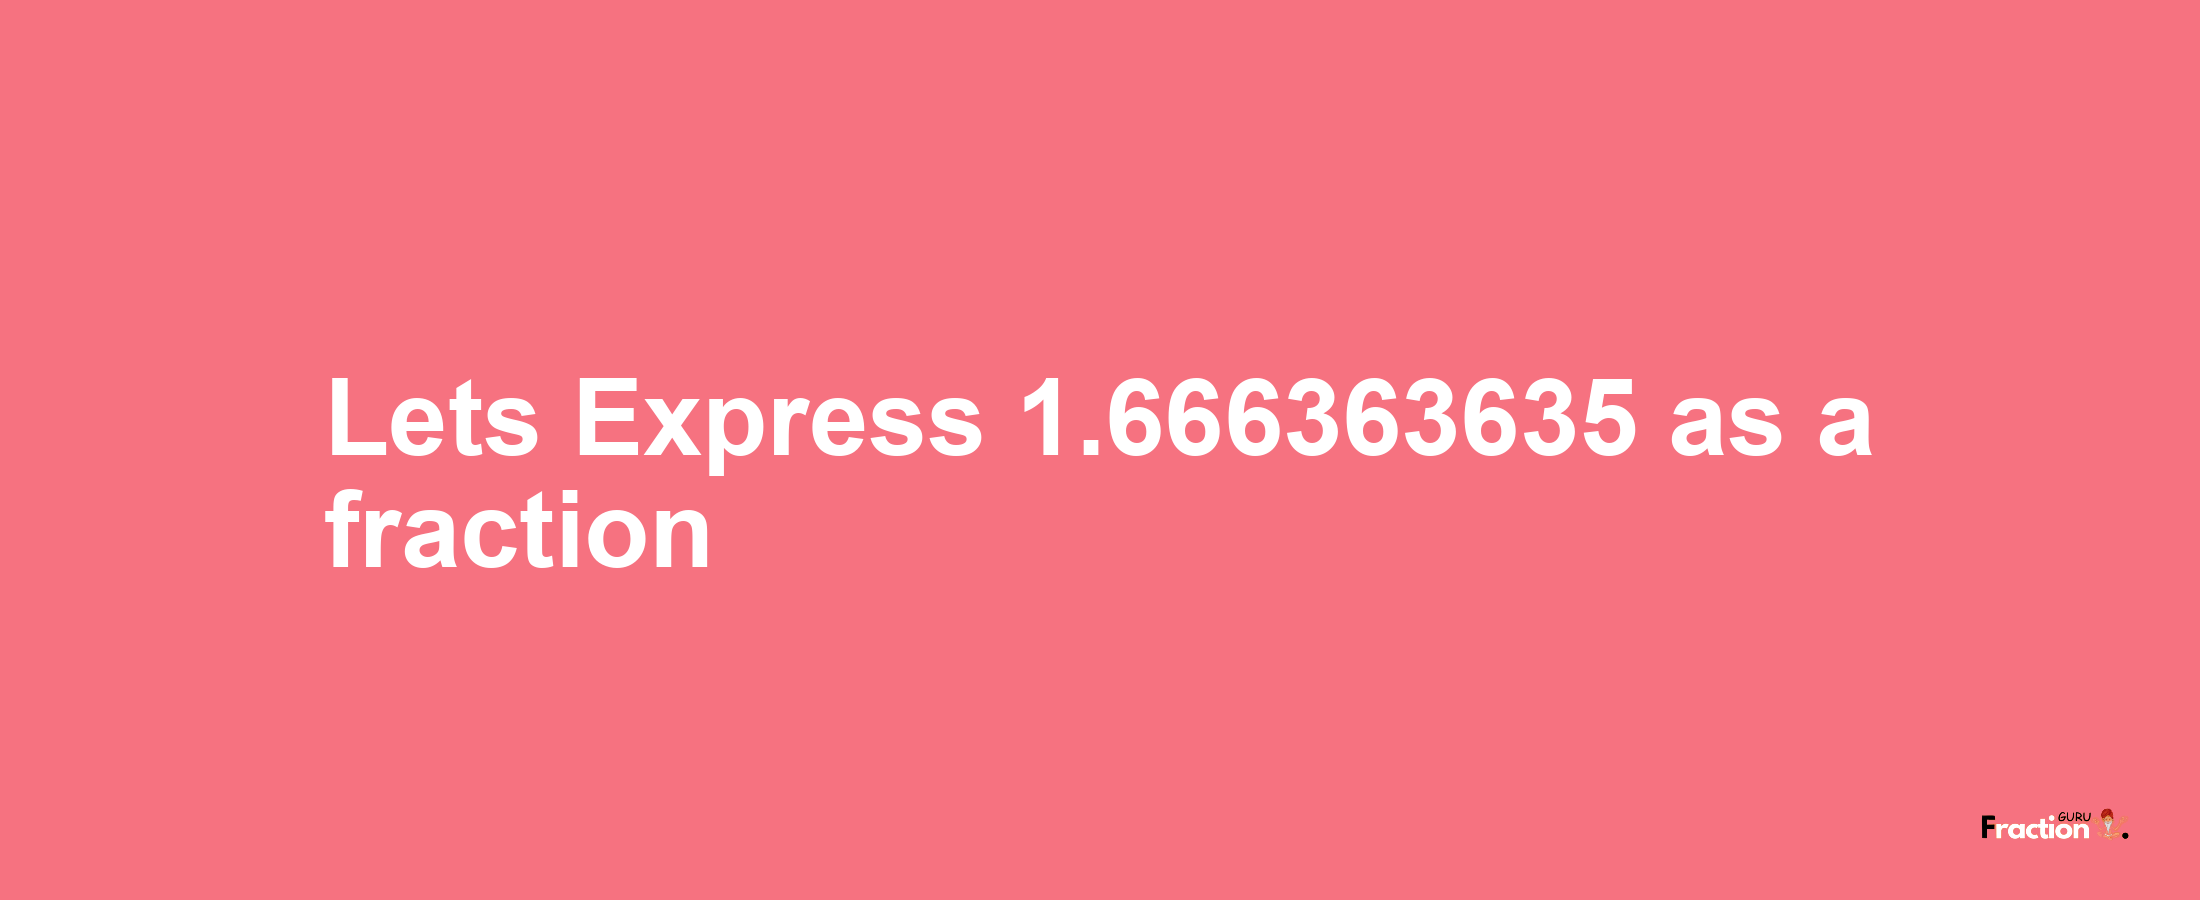 Lets Express 1.666363635 as afraction